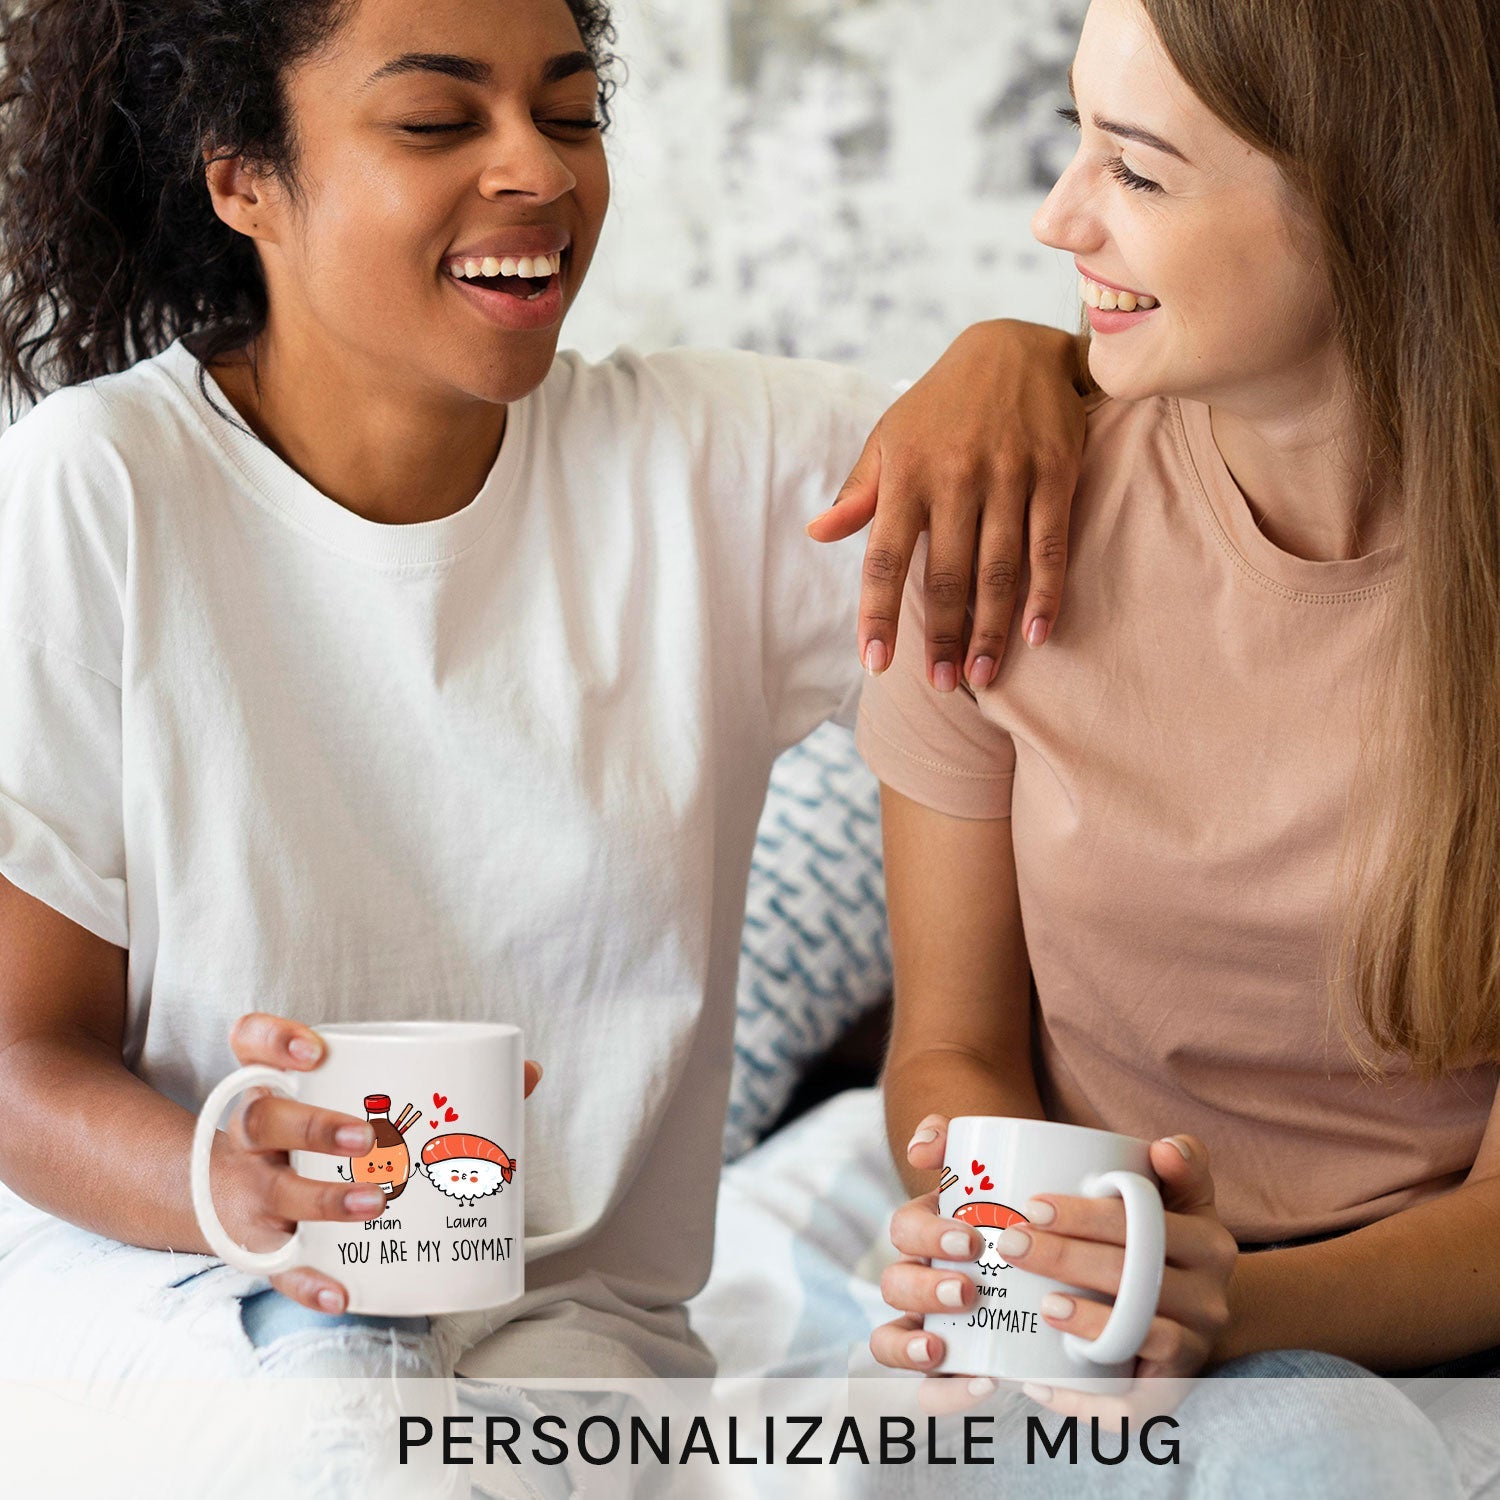 You're My Soymate - Personalized Anniversary or Valentine's Day gift For Boyfriend or Girlfriend - Custom Mug - MyMindfulGifts